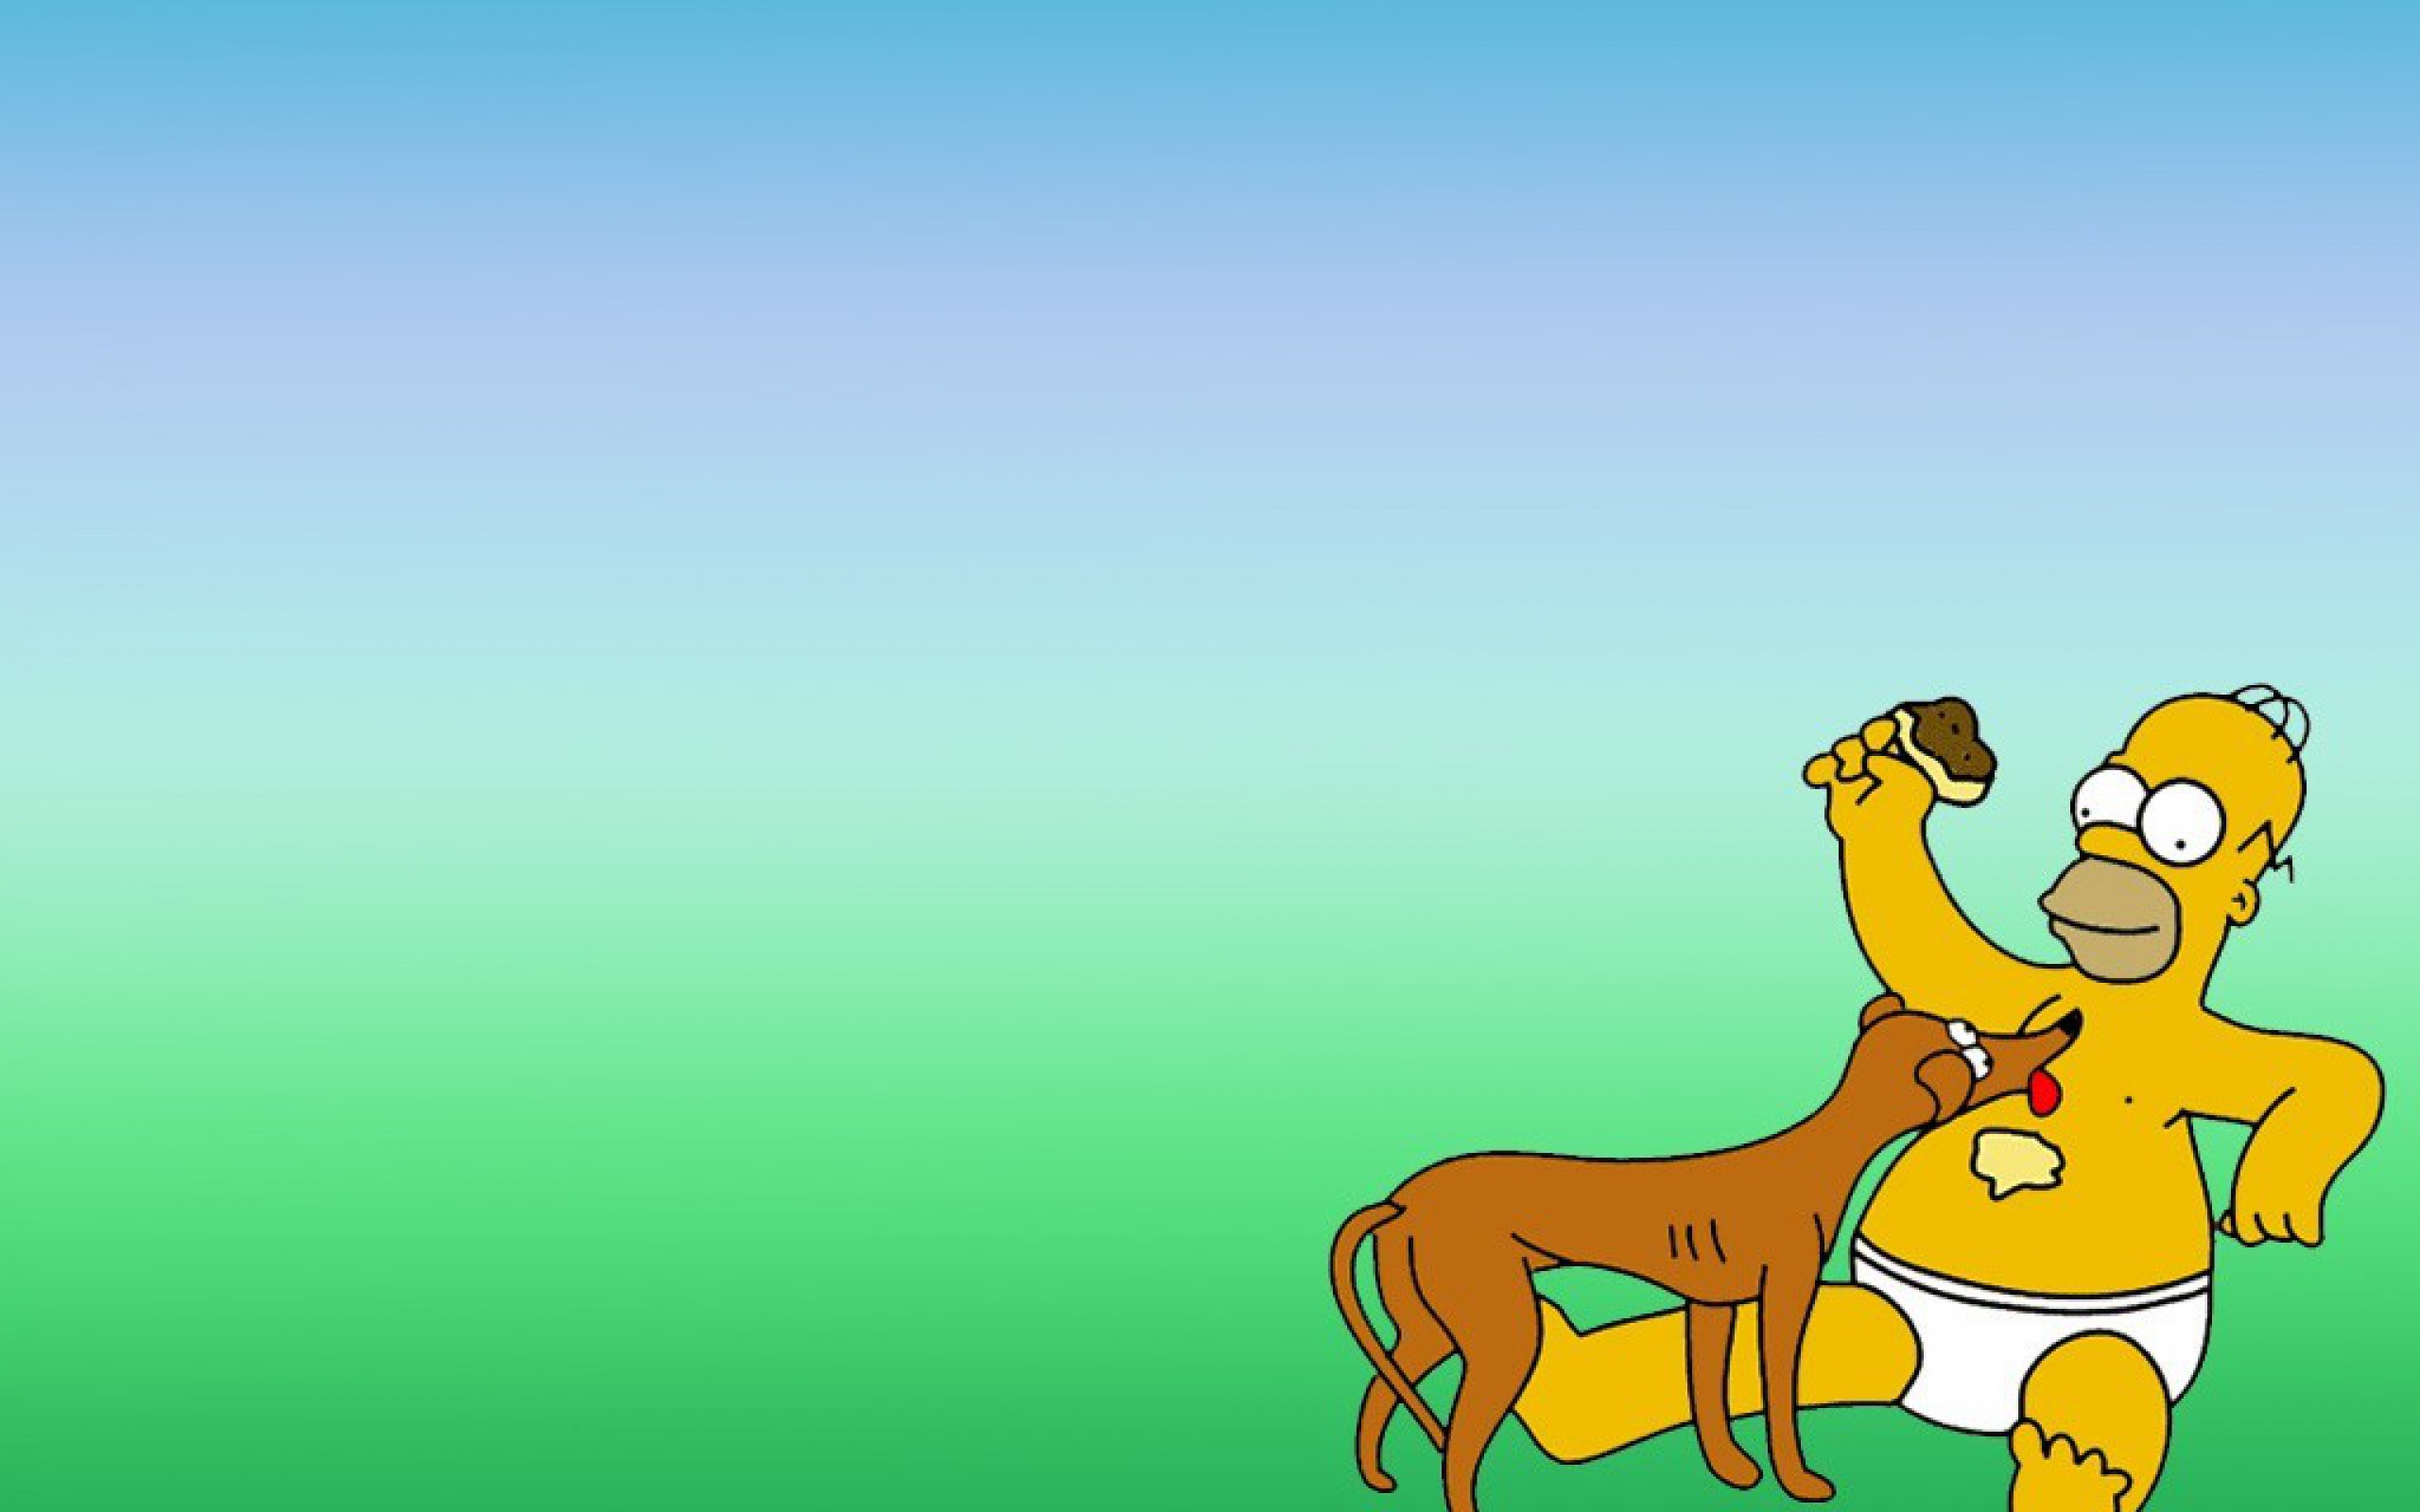 Best The Simpsons Backgrounds - Wallpaper, High Definition ...